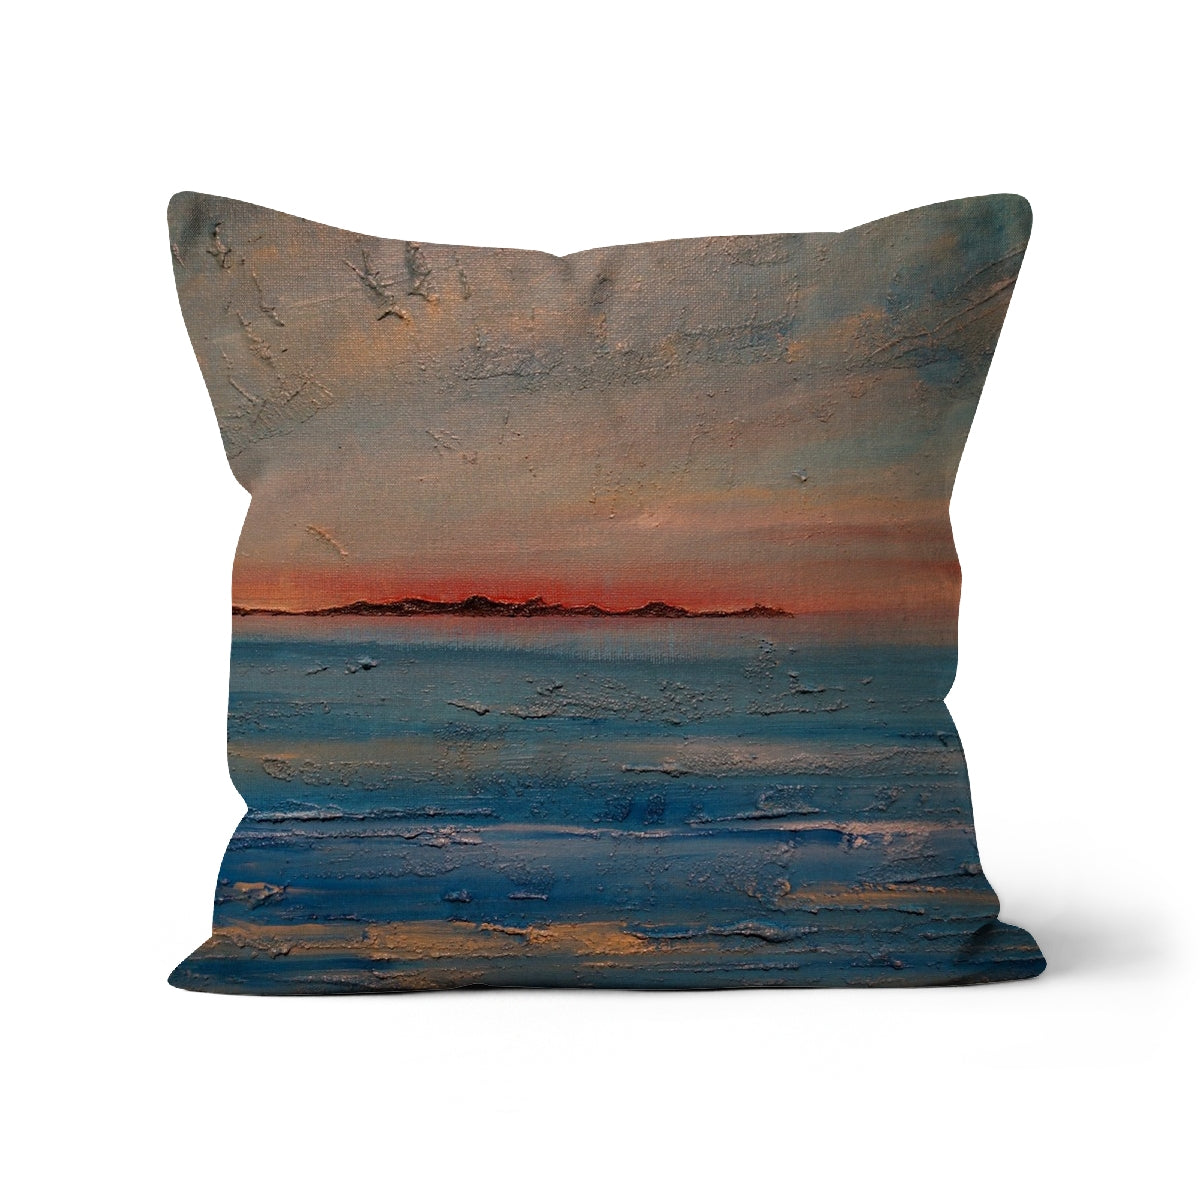 Gigha Sunset Art Gifts Cushion-Cushions-Hebridean Islands Art Gallery-Faux Suede-16"x16"-Paintings, Prints, Homeware, Art Gifts From Scotland By Scottish Artist Kevin Hunter